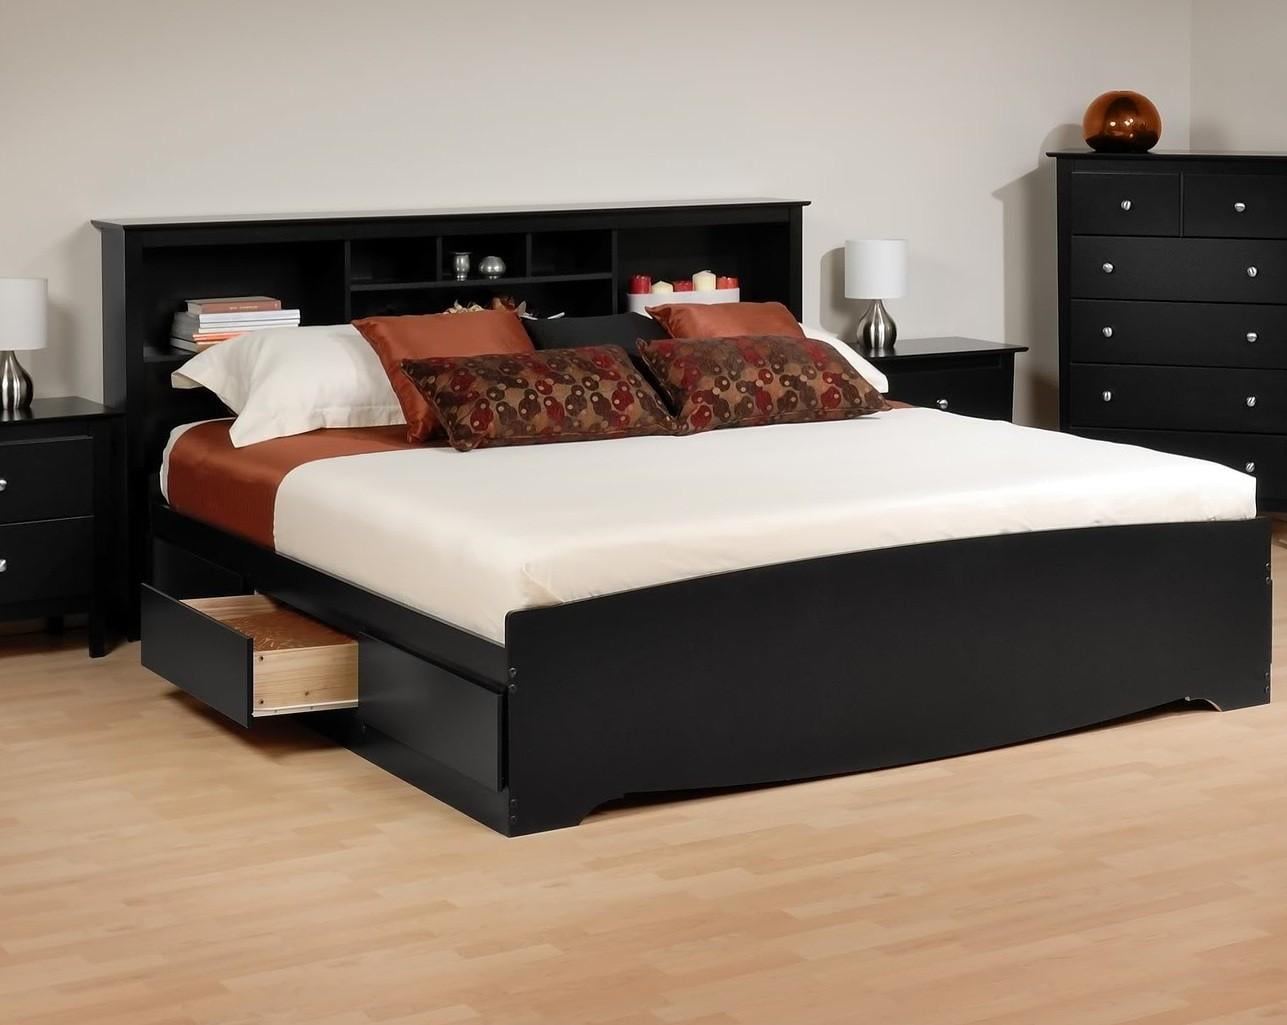 Platform Storage Bed W Bookcase, King Size Bed With Drawers And Bookcase Headboard